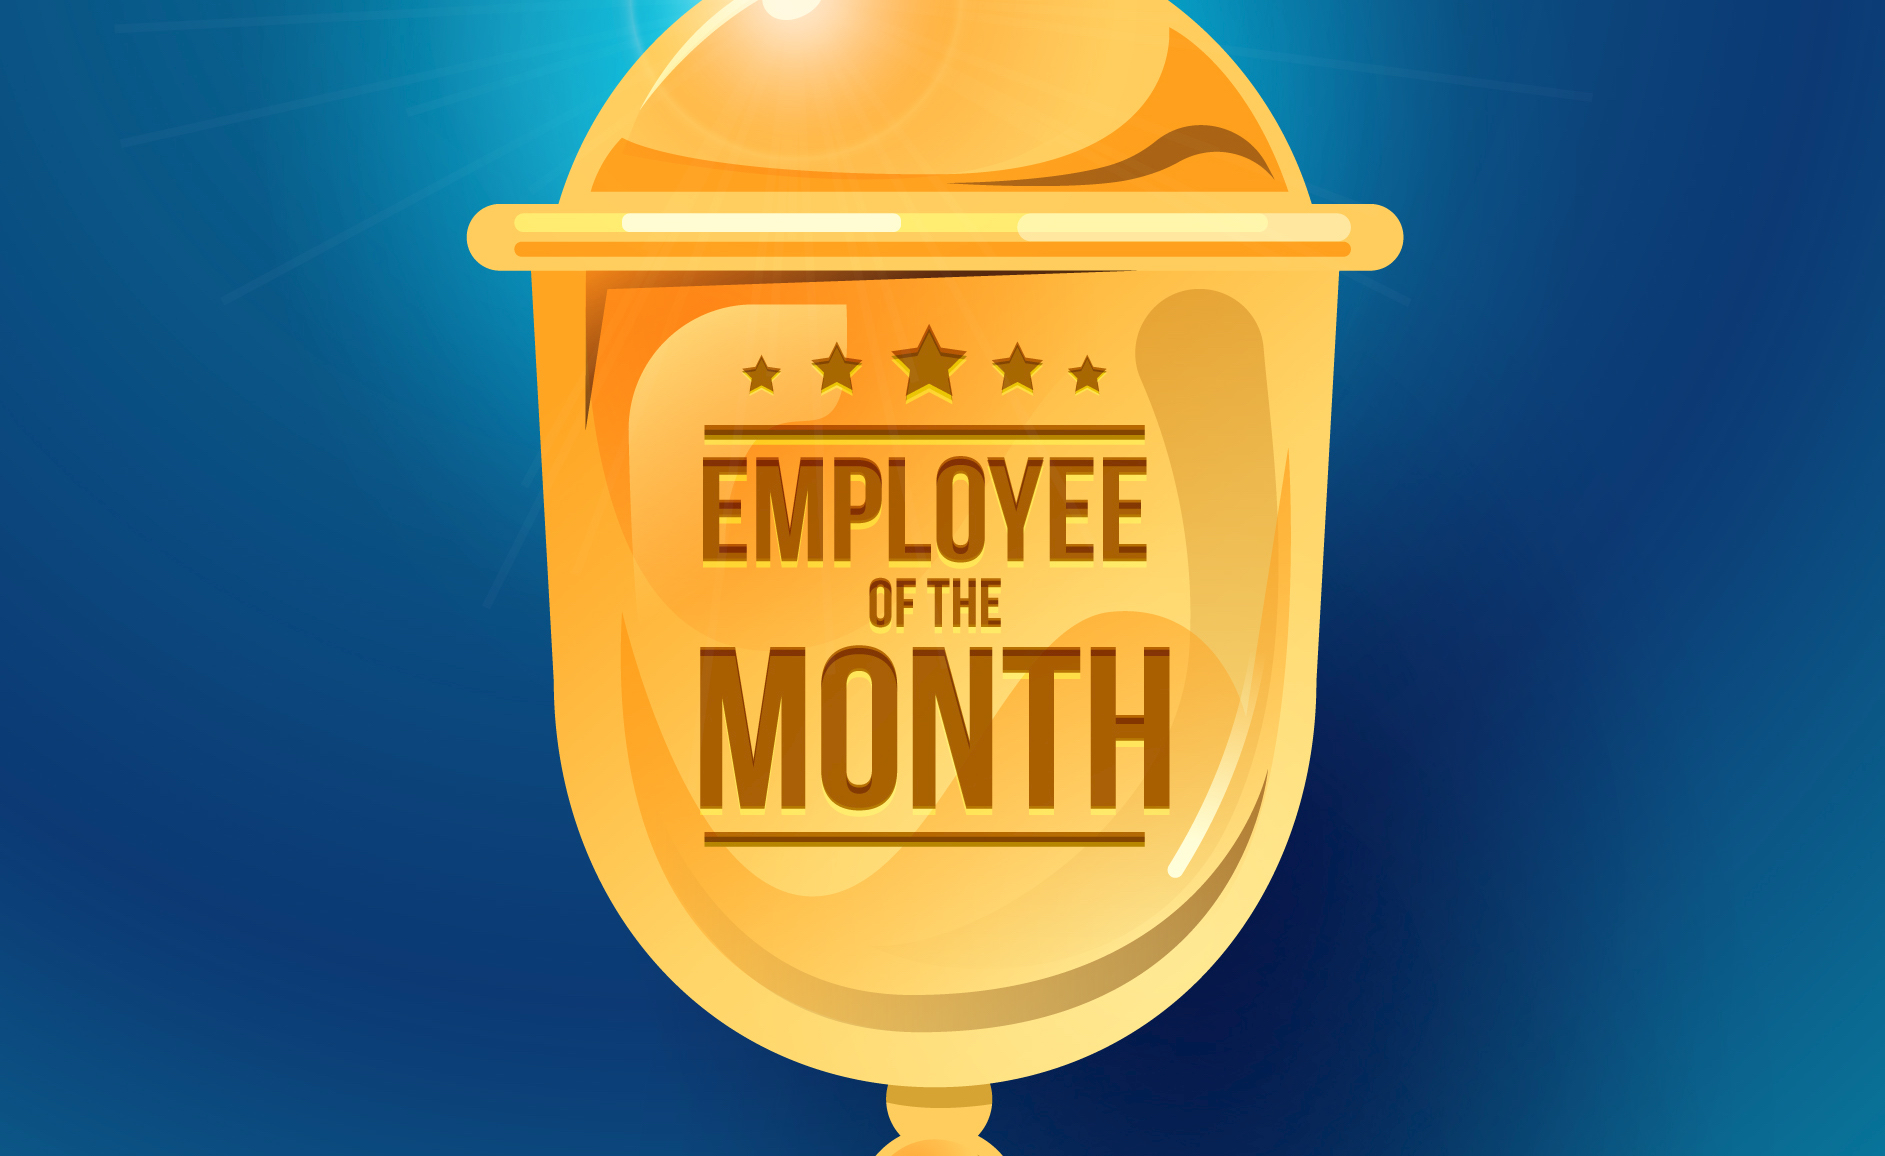 Congratulations to Ruby Eubank who is our August Employee of the Month!